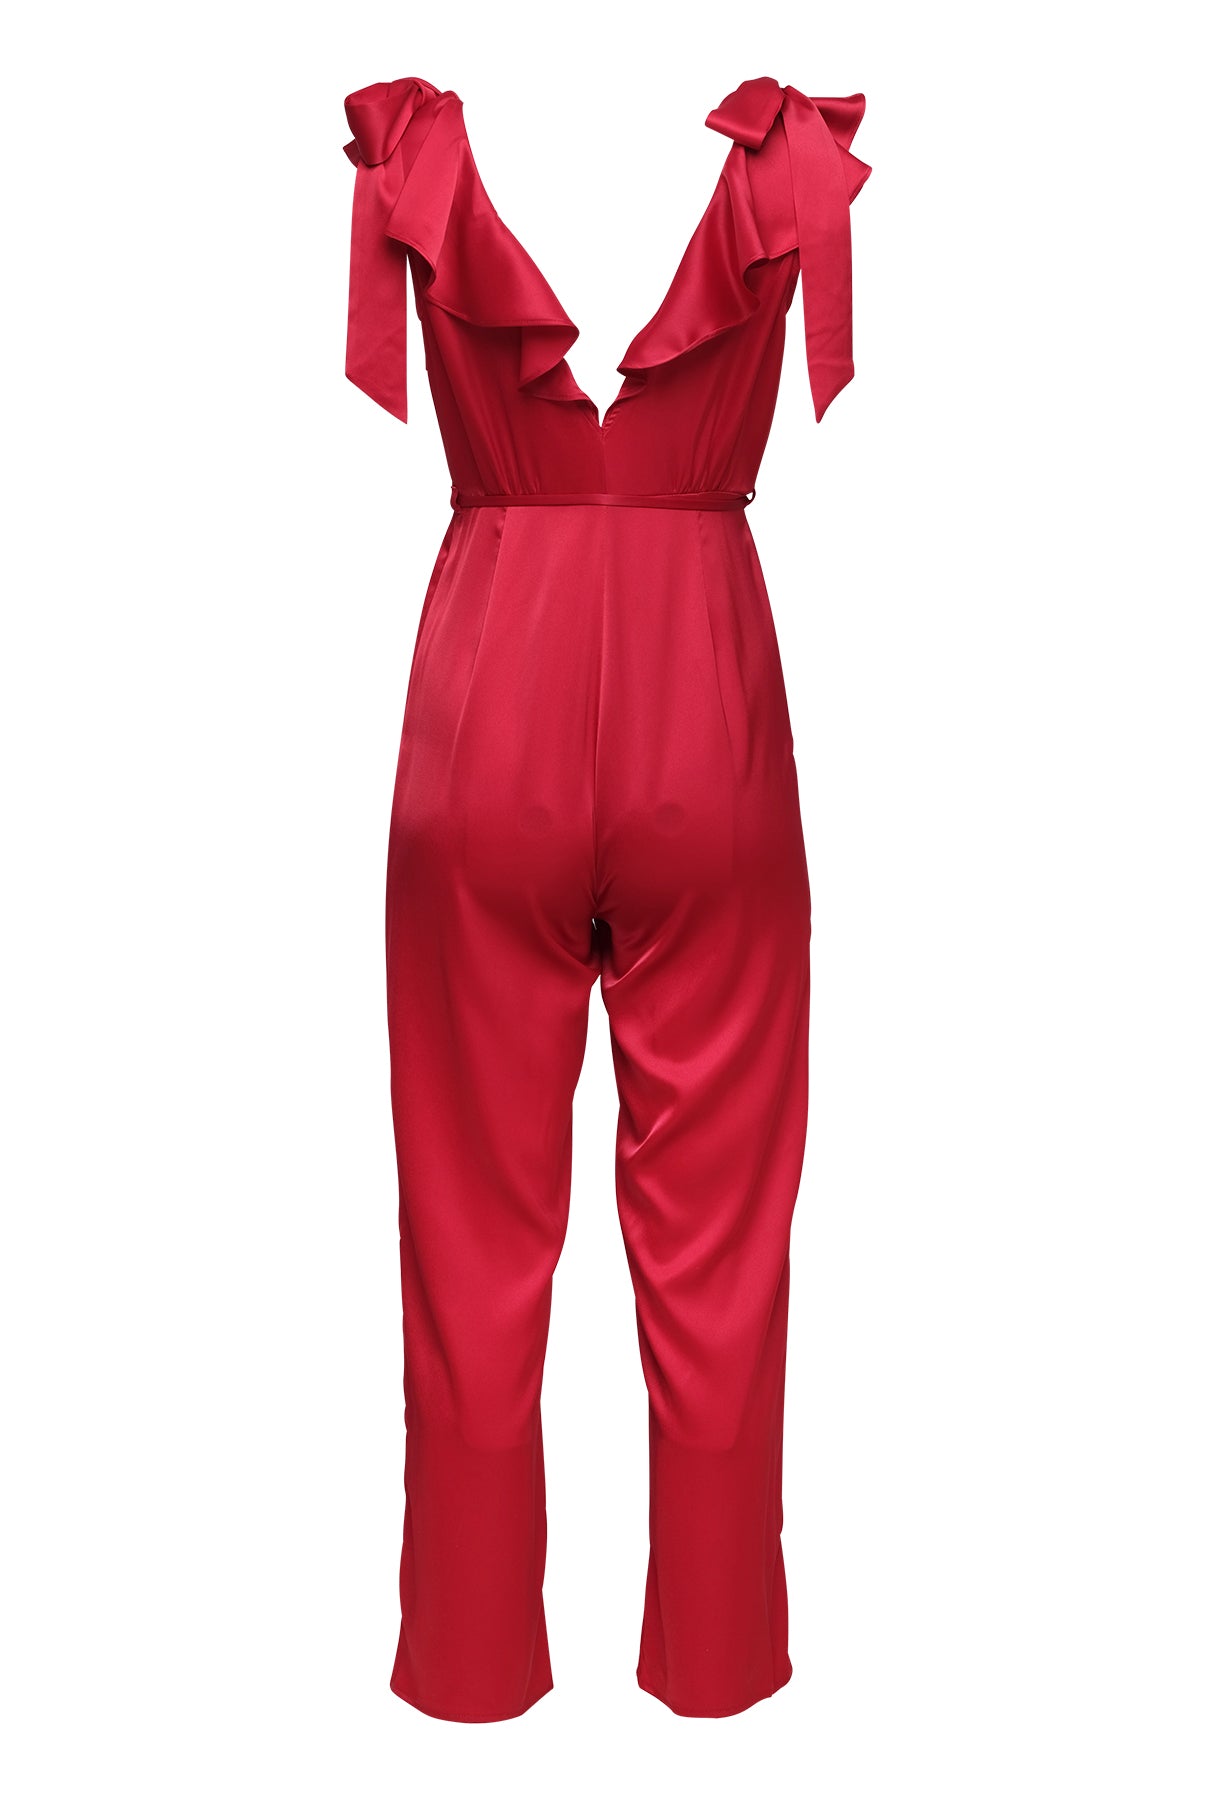 Frills and Thrills Jumpsuit - Fire